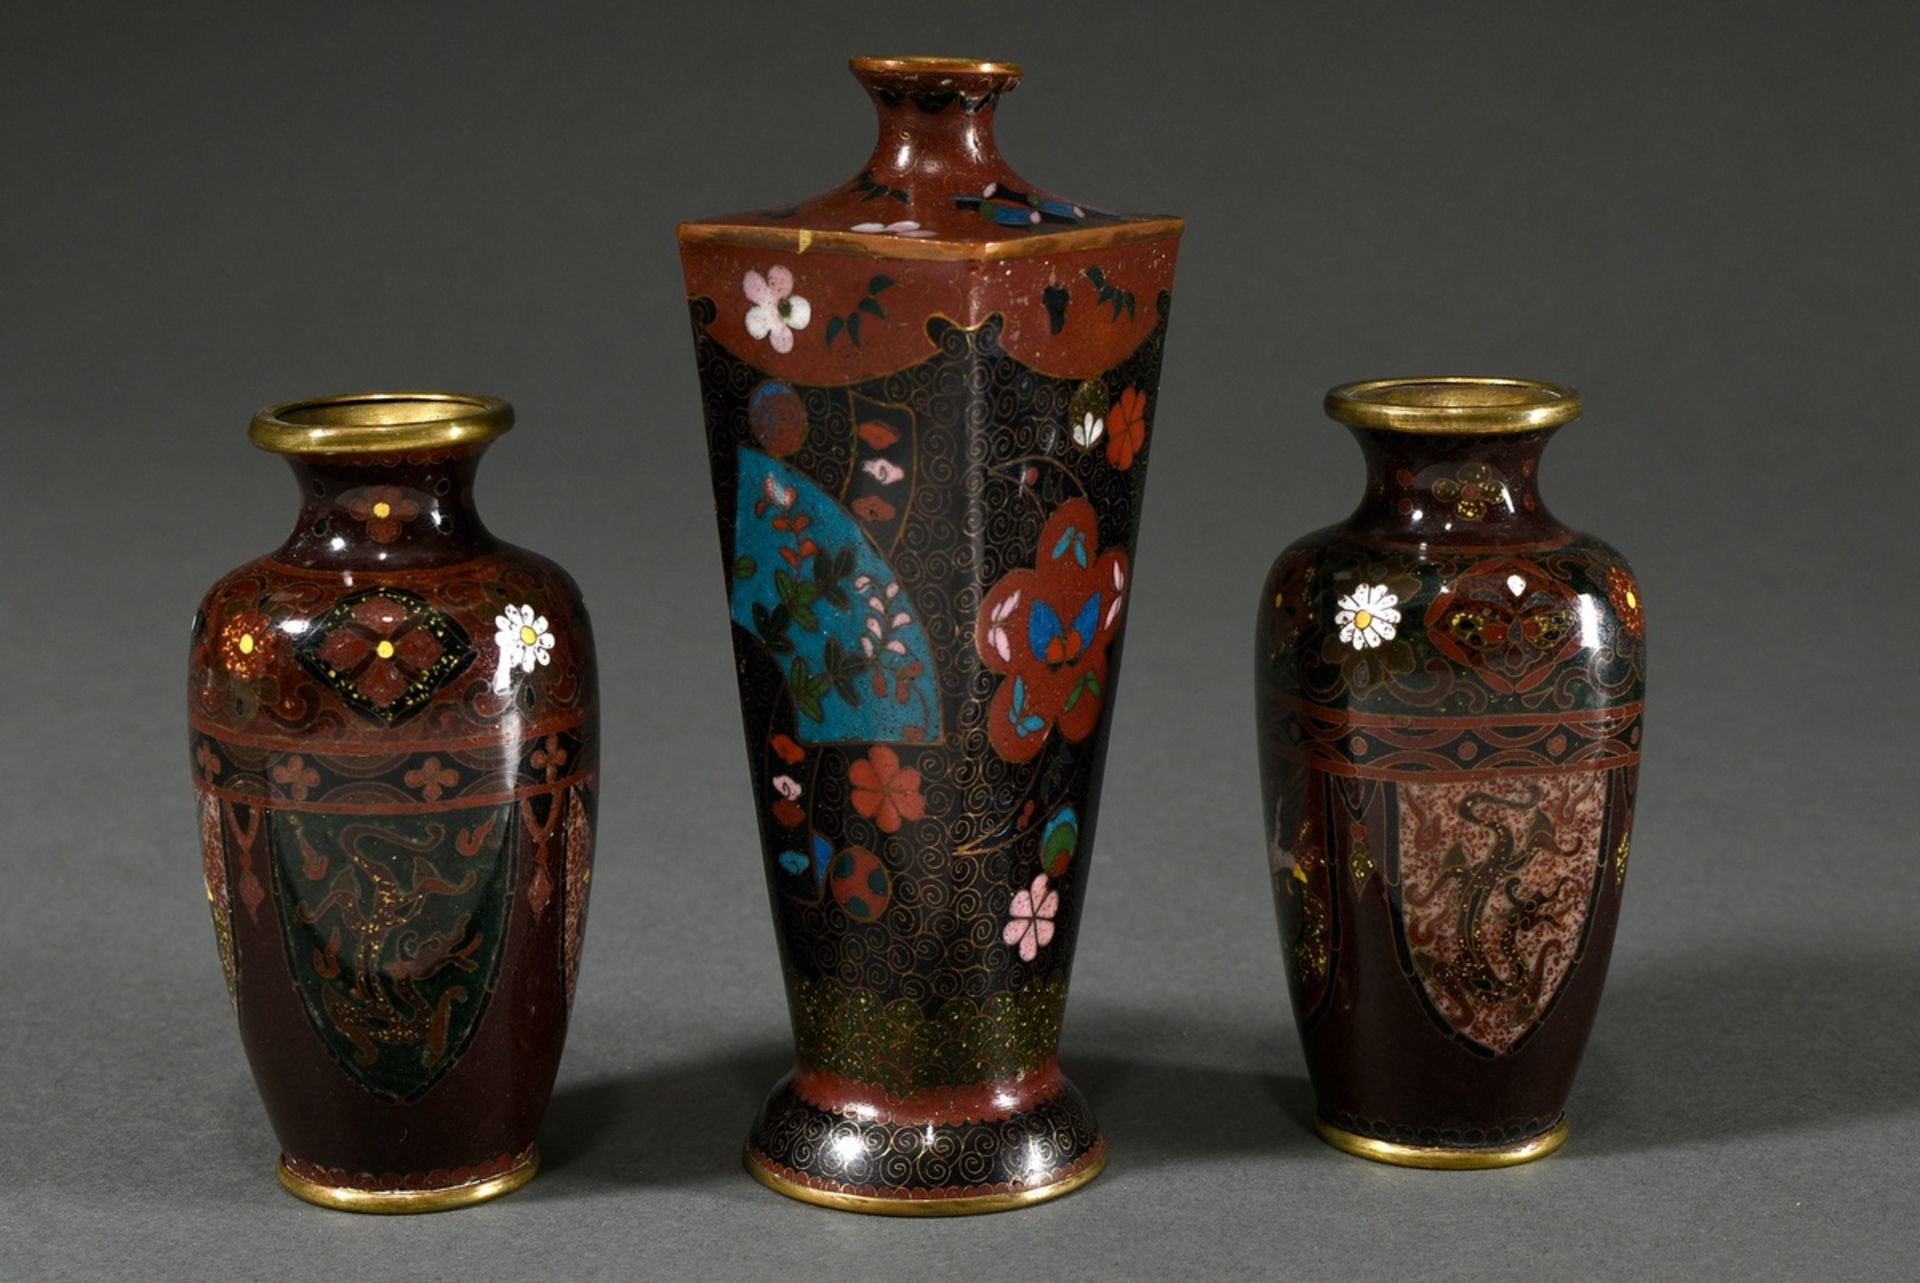 3 Various small cloisonné vases: pair with lancet-shaped cartouches "Birds and Dragons" and tall va - Image 2 of 8